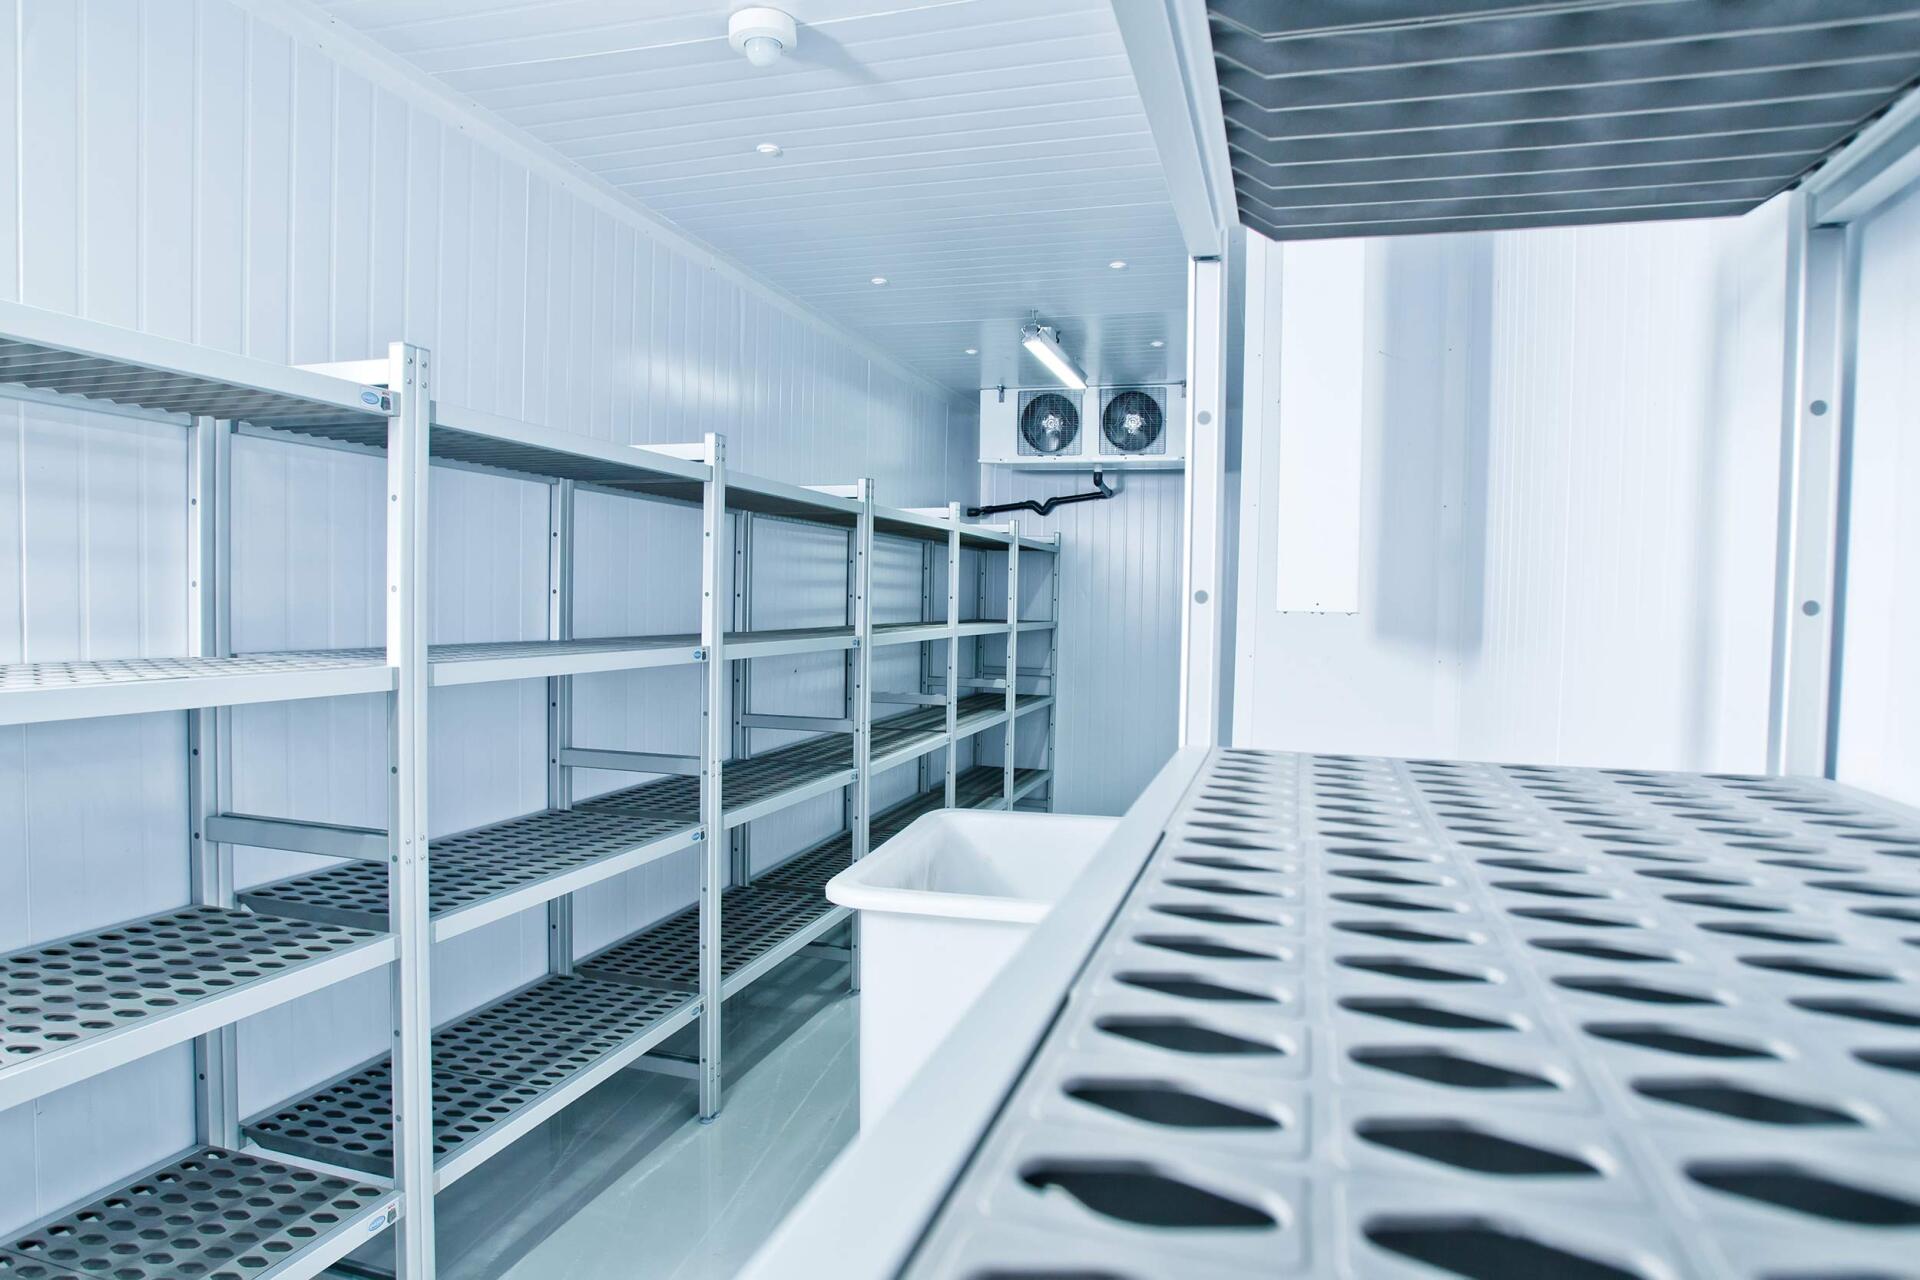 Shelving in a commercial refrigerator in Coffs Harbour